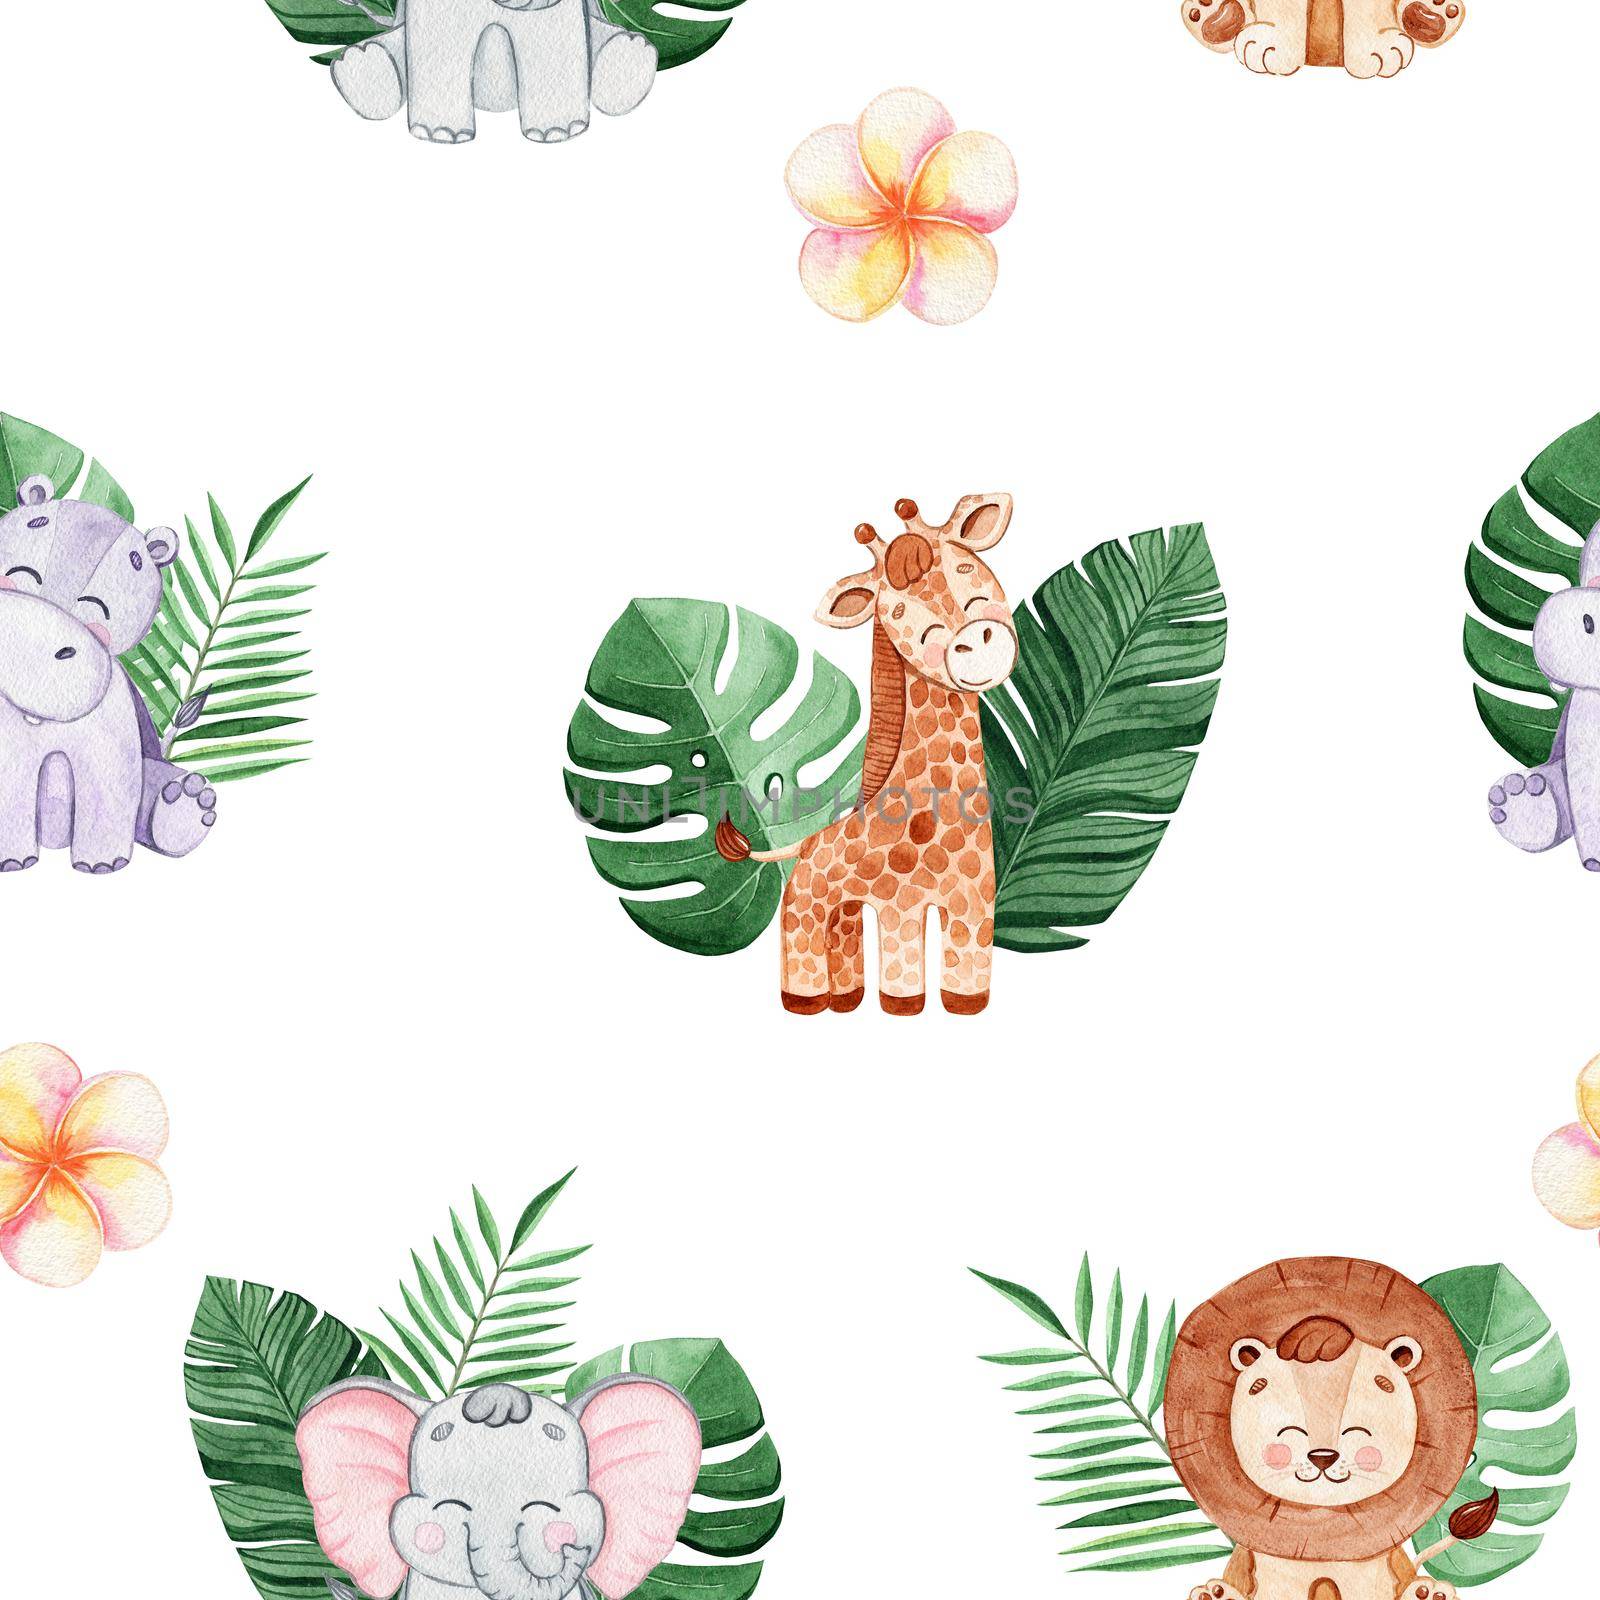 watercolor safari animals and green tropical palm leaves and flowers seamless pattern on white background for fabric,textile,branding,invitations,scrapbooking,wrapping by dreamloud